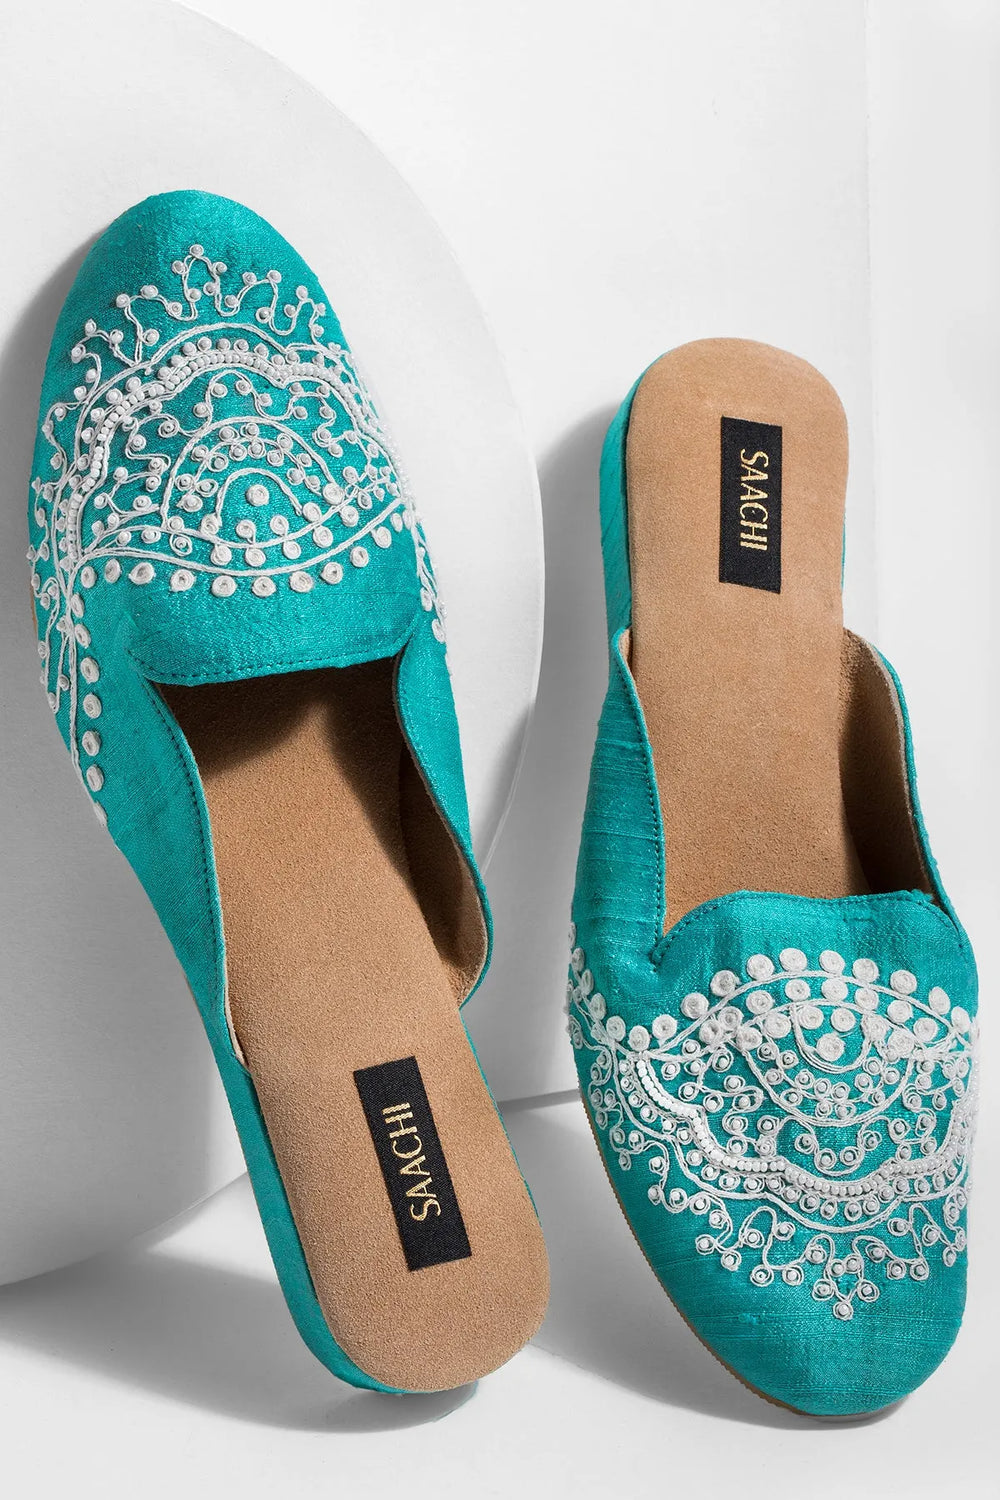 Third Eye Embroidered Mule Turquoise